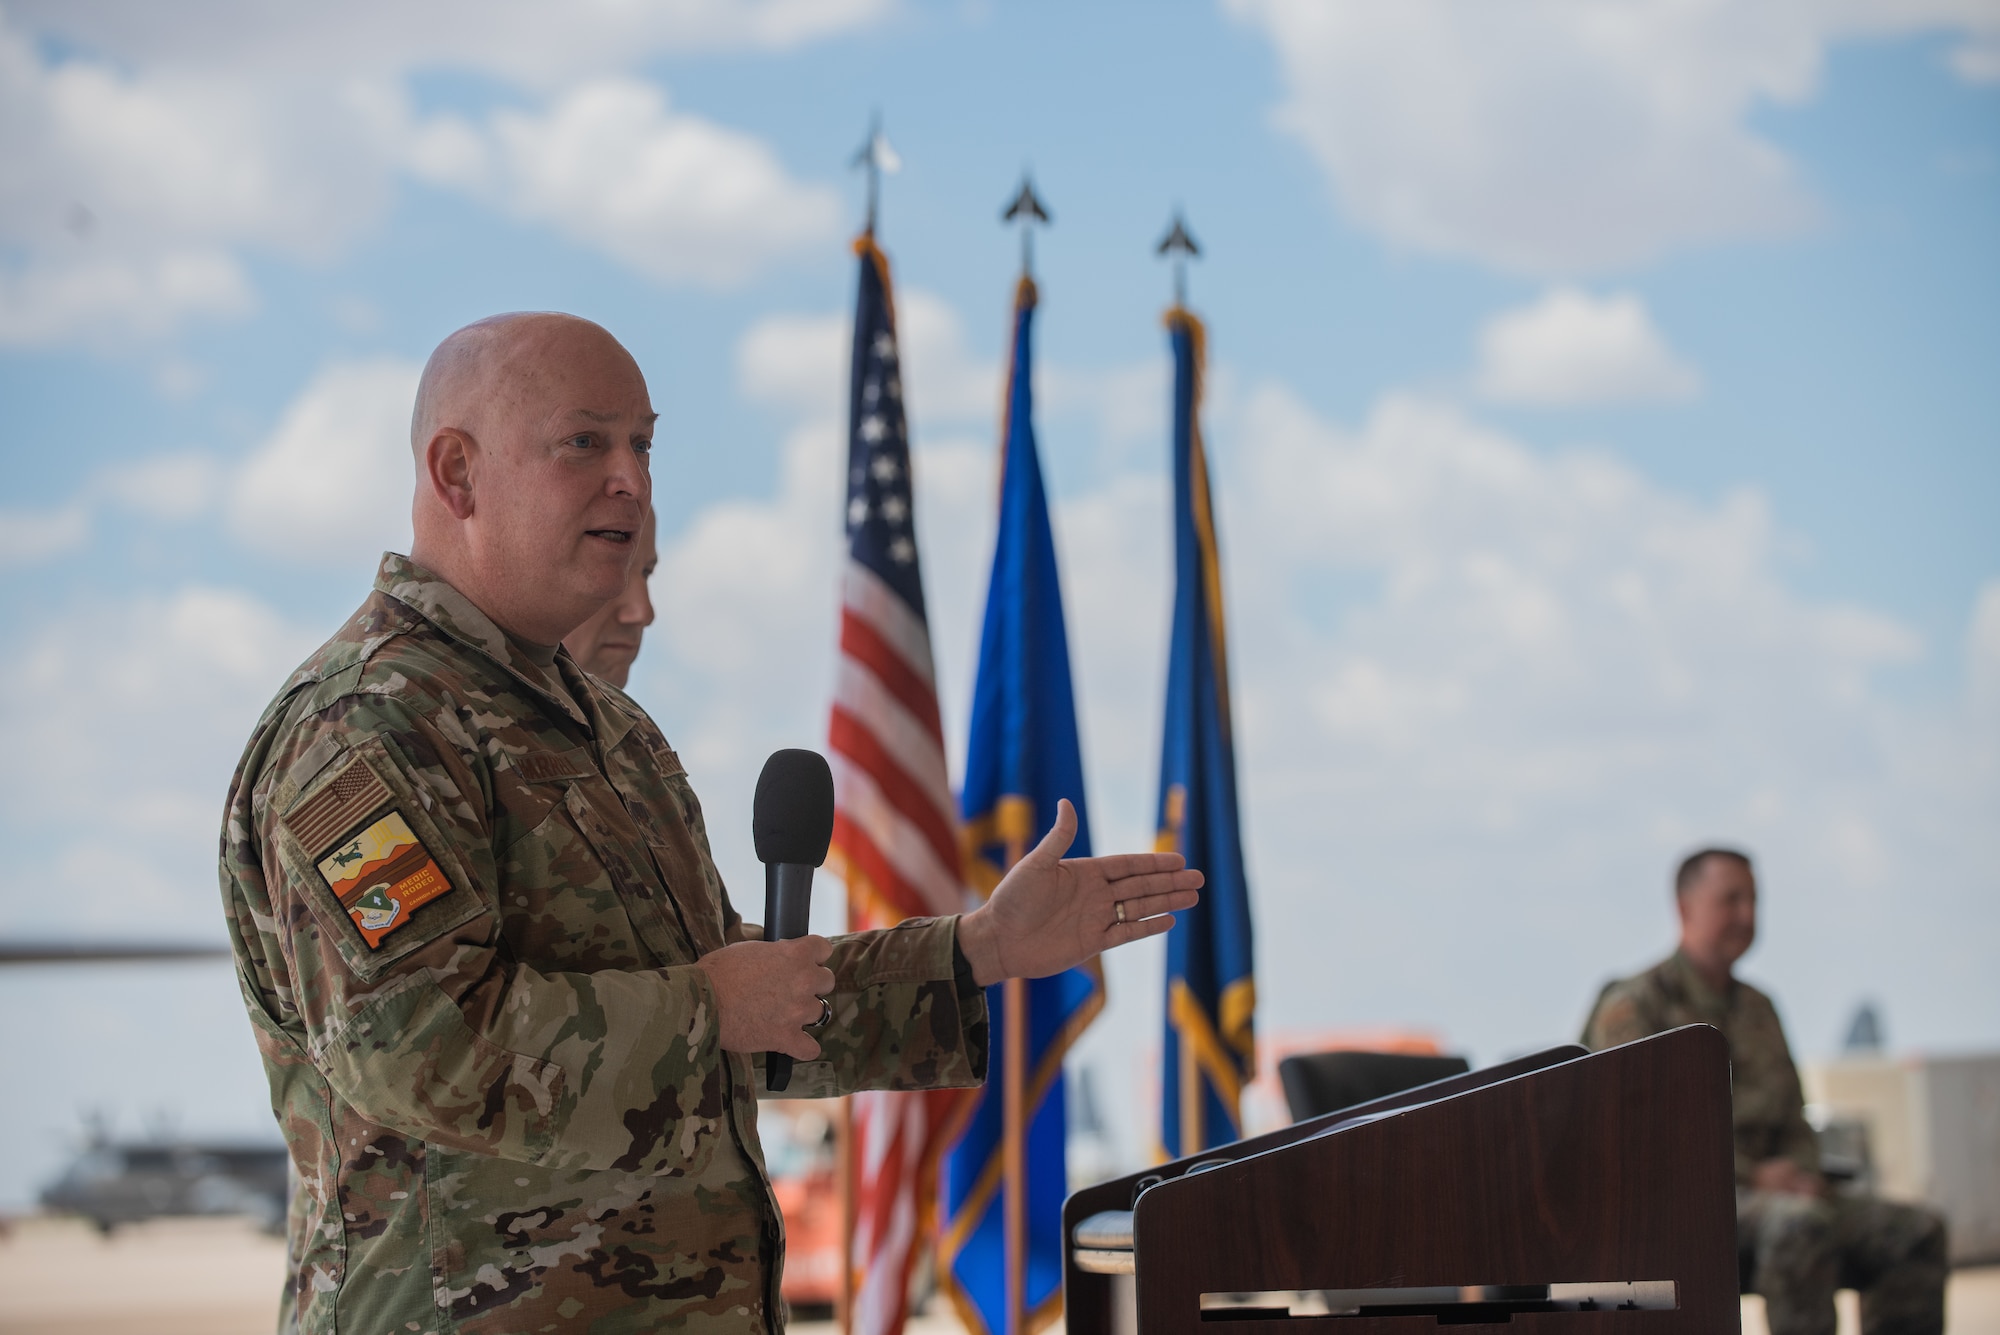 U.S. Air Force Brig. Gen. Thomas W. Harrell, Air Force Medical Readiness Agency commander, speaks at the Medic Rodeo 2022 competition opening ceremony  hosted at Cannon Air Force Base, N.M., Aug. 15, 2022. The 27th Special Operations Wing hosted the 13th iteration of Medic Rodeo; this year incorporated the MEDIC-X initiative which organizes, trains and equips medics to create a more agile, multi-proficient, and interoperable force, capable of accomplishing tasks outside of their core Air Force specialties. (U.S. Air Force photo by Airman 1st Class Mateo Parra)